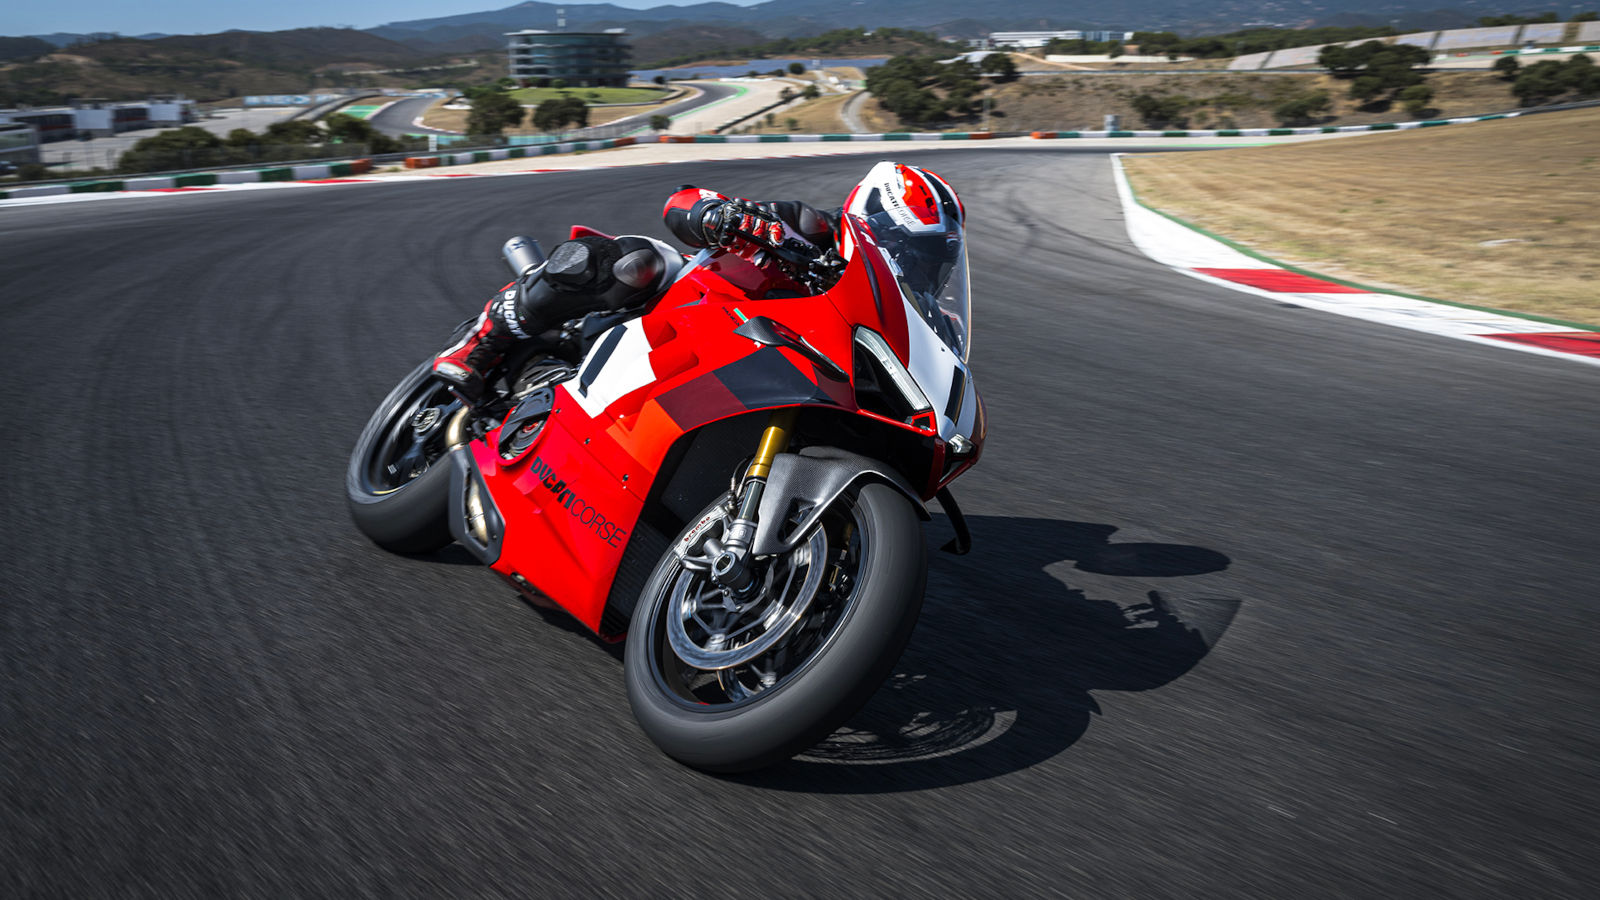 Distinctive Qualities of Ducati Motorcycles That Stand Out From The Competition